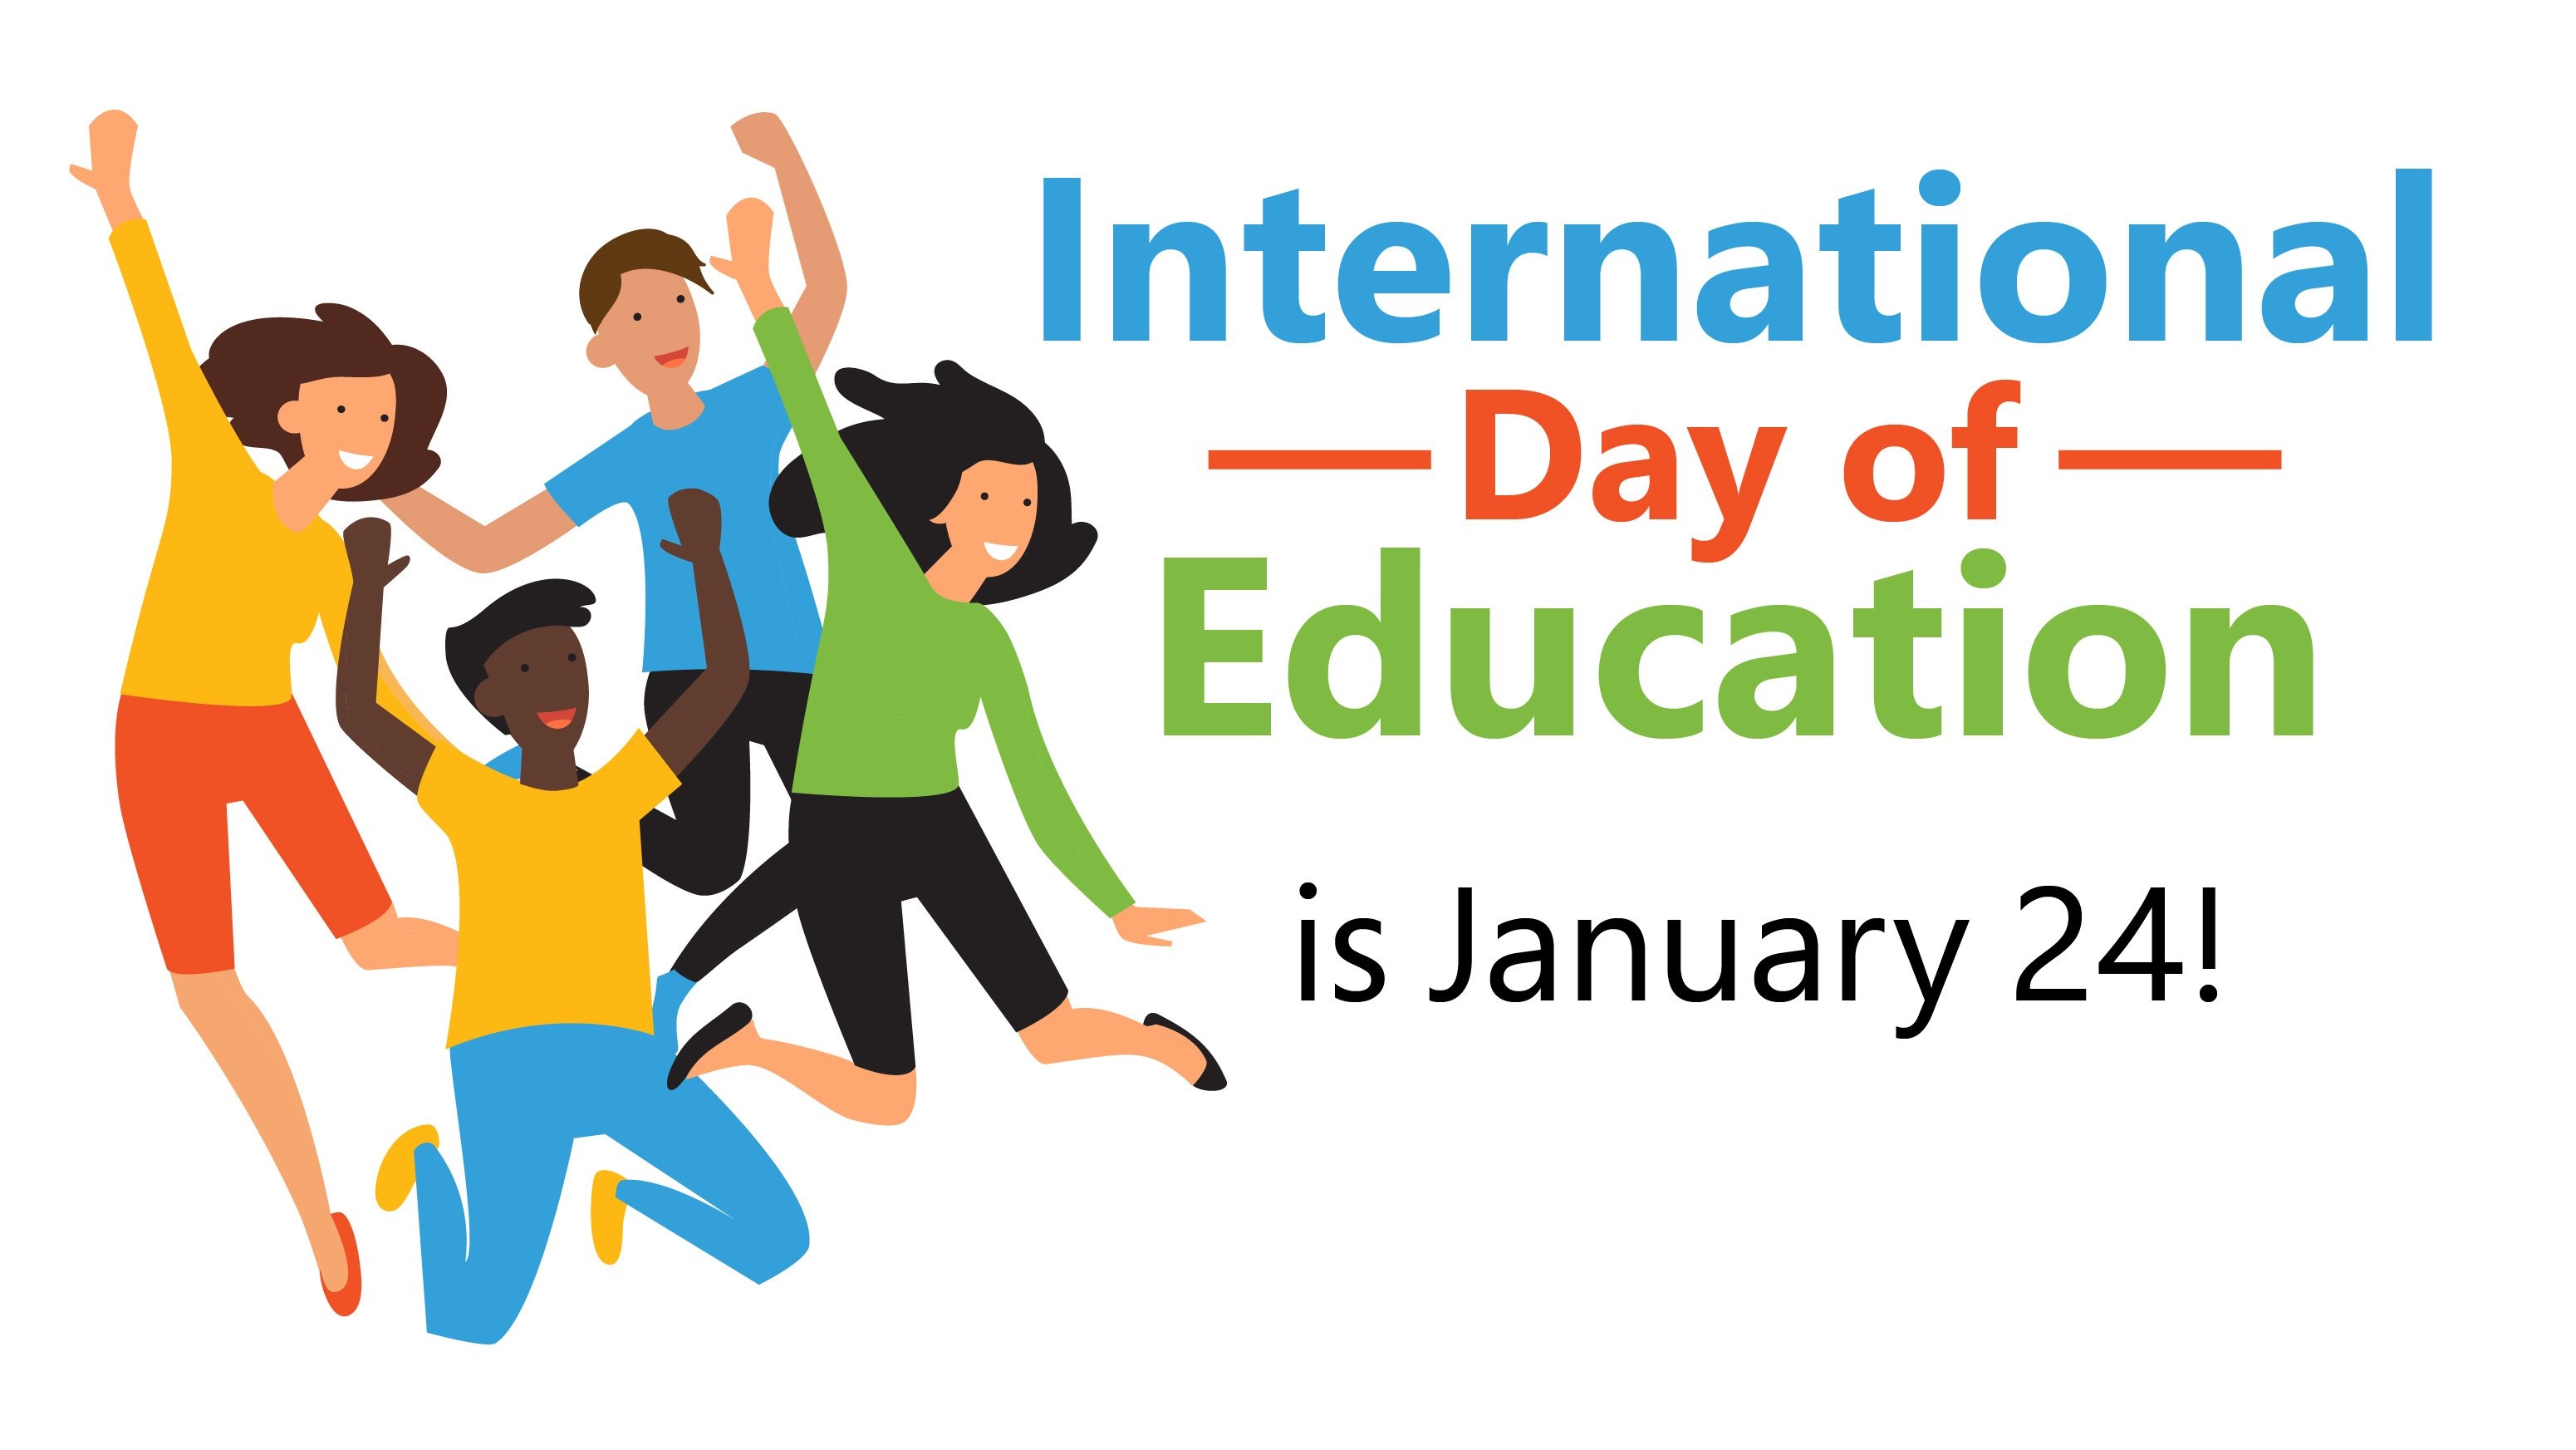 The International Day of Education on January 24th 